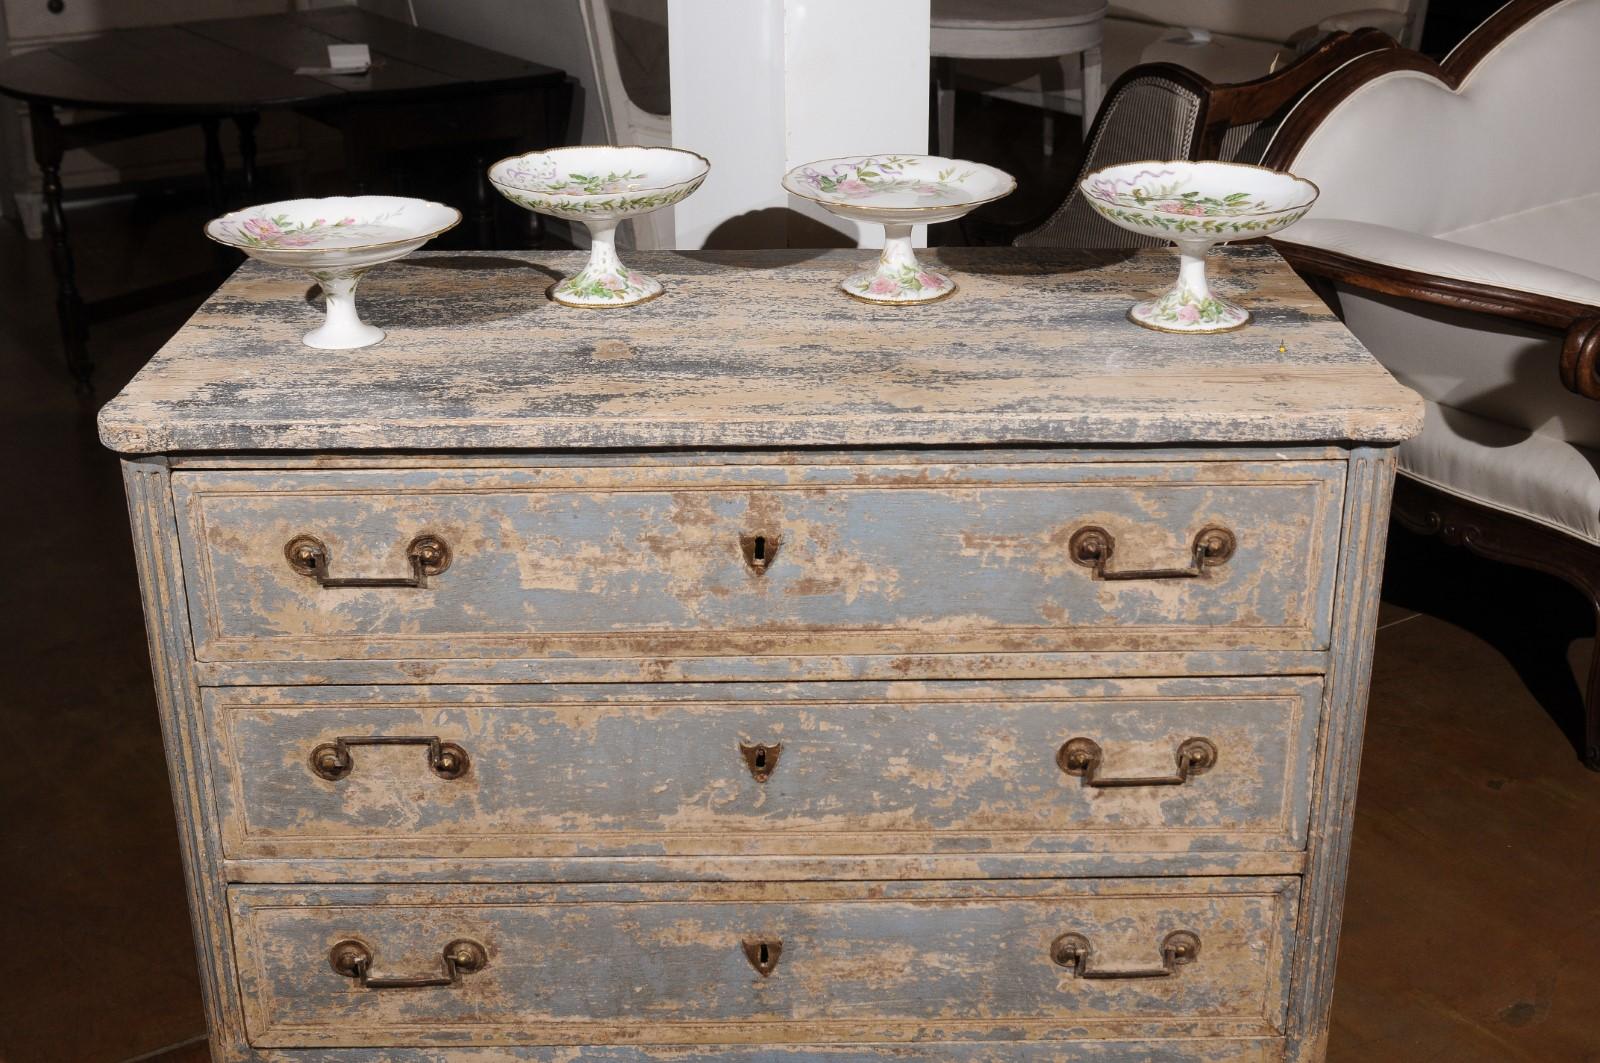 Four English porcelain compotes from the 20th century, with floral decor and gilded trim, priced and sold individually. Attracting our attention with their lovely silhouettes and delicate decor, each of these four compotes features a scalloped edge